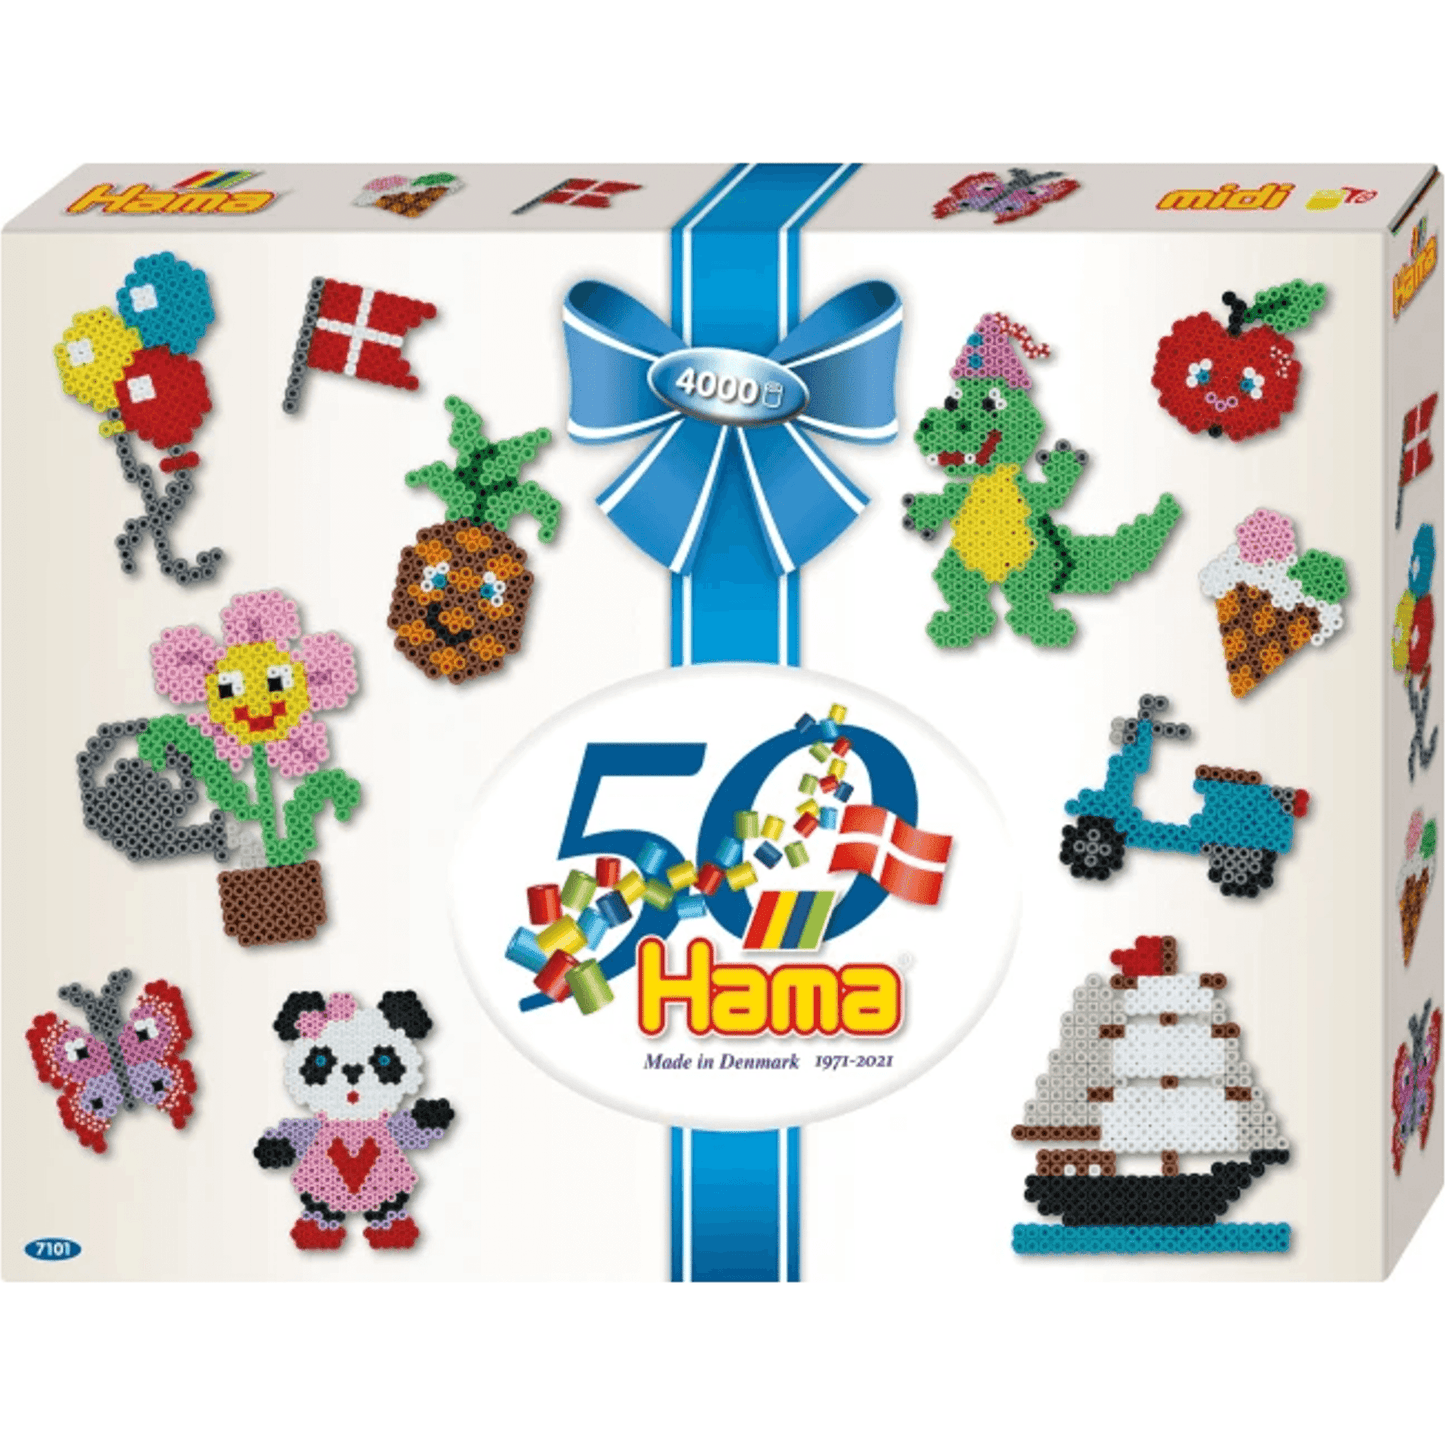 Hama Beads 50th Anniversary Pack - 4000 Beads - Toybox Tales